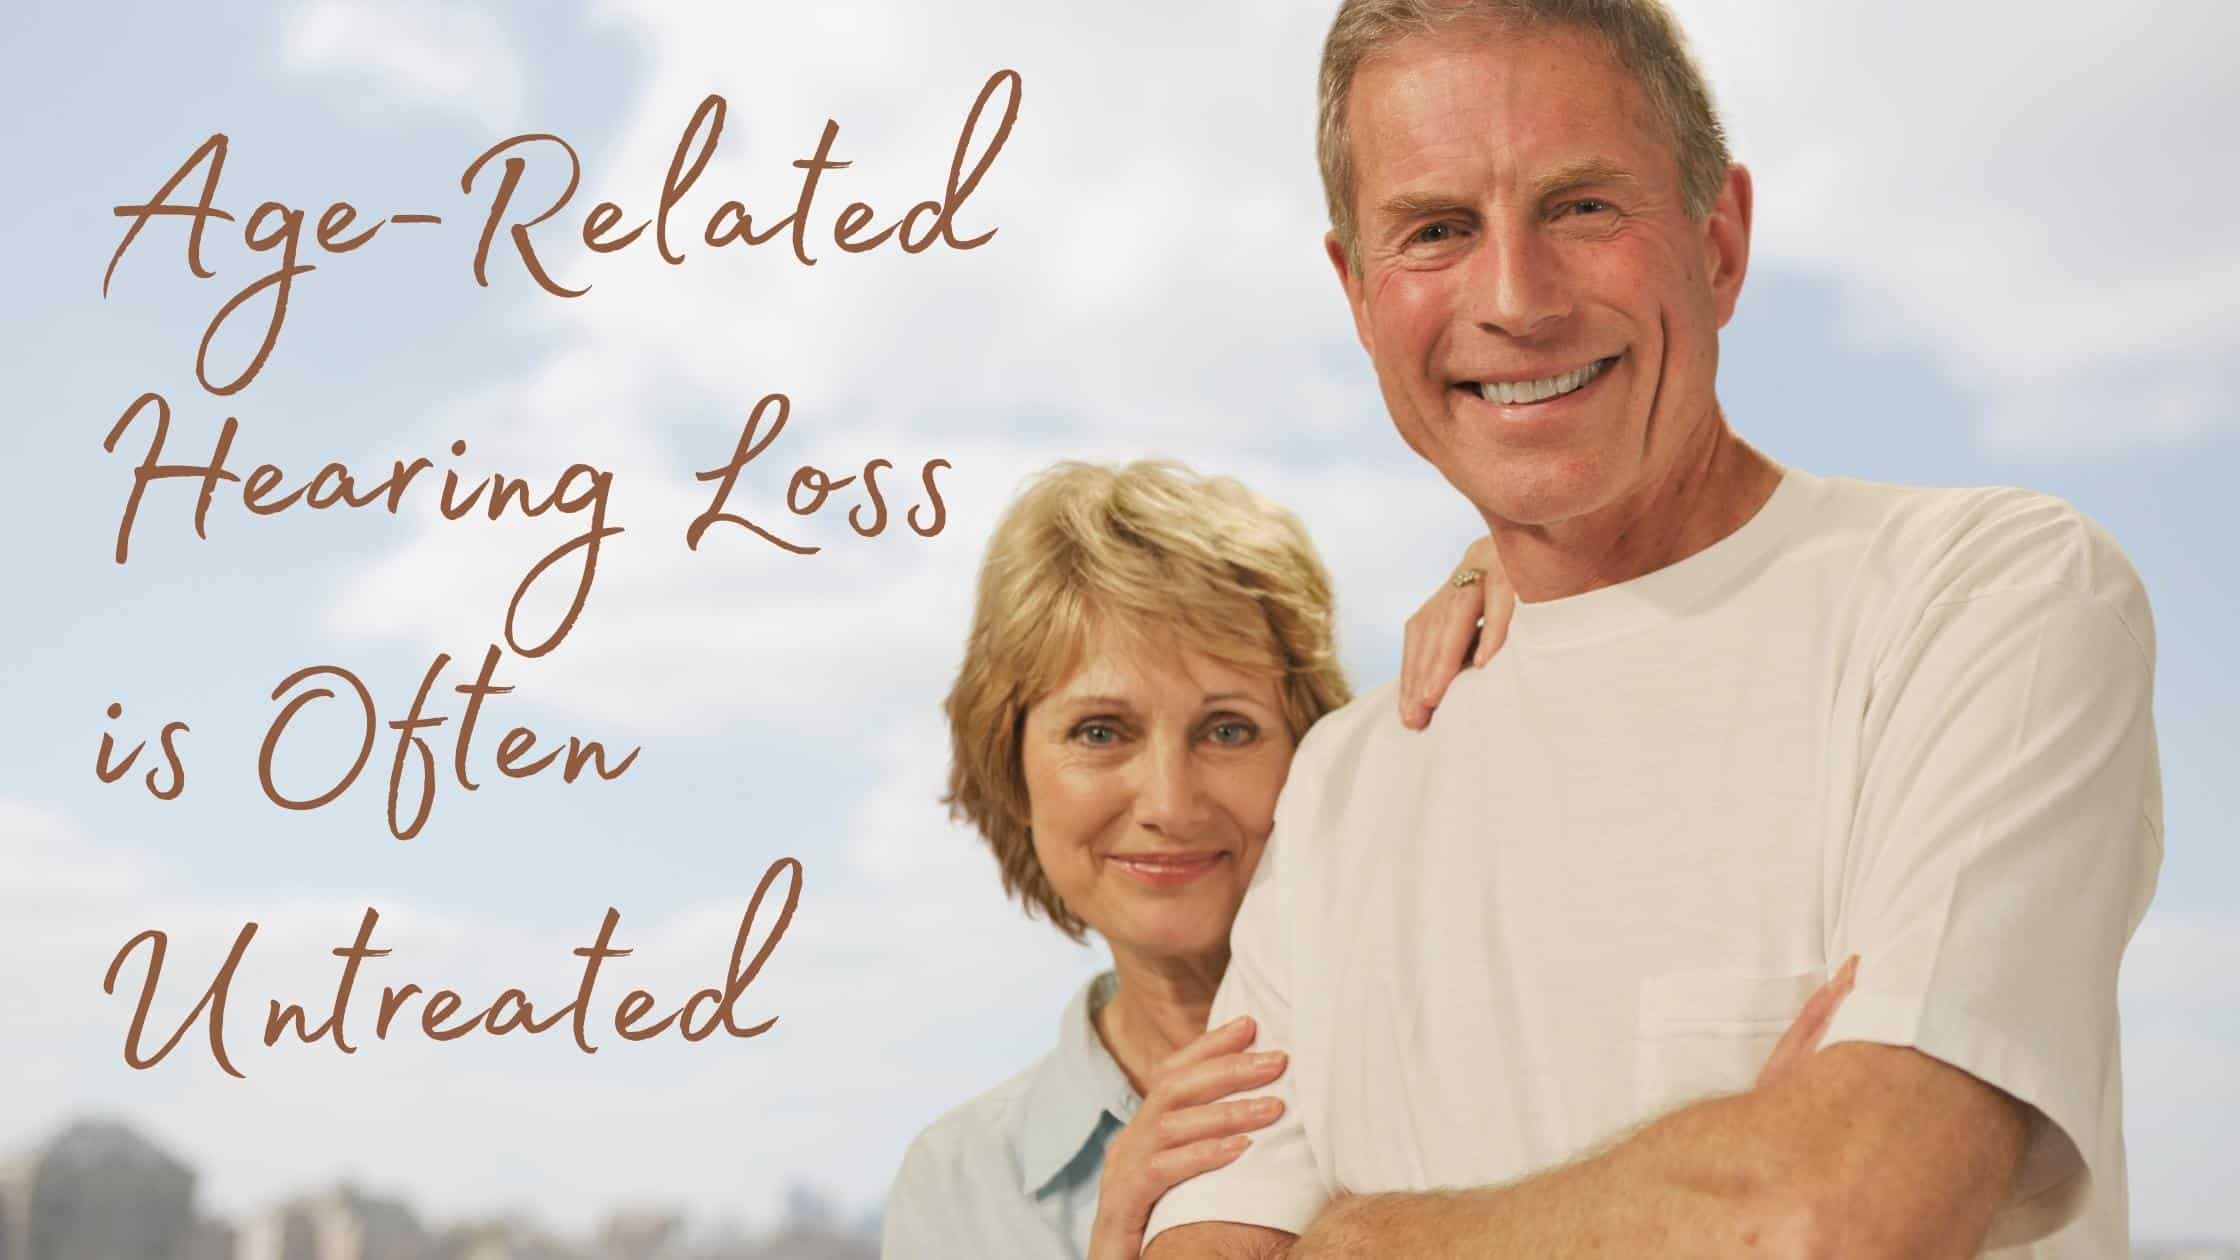 Featured image for “Dealing with Age-Related Hearing Loss”